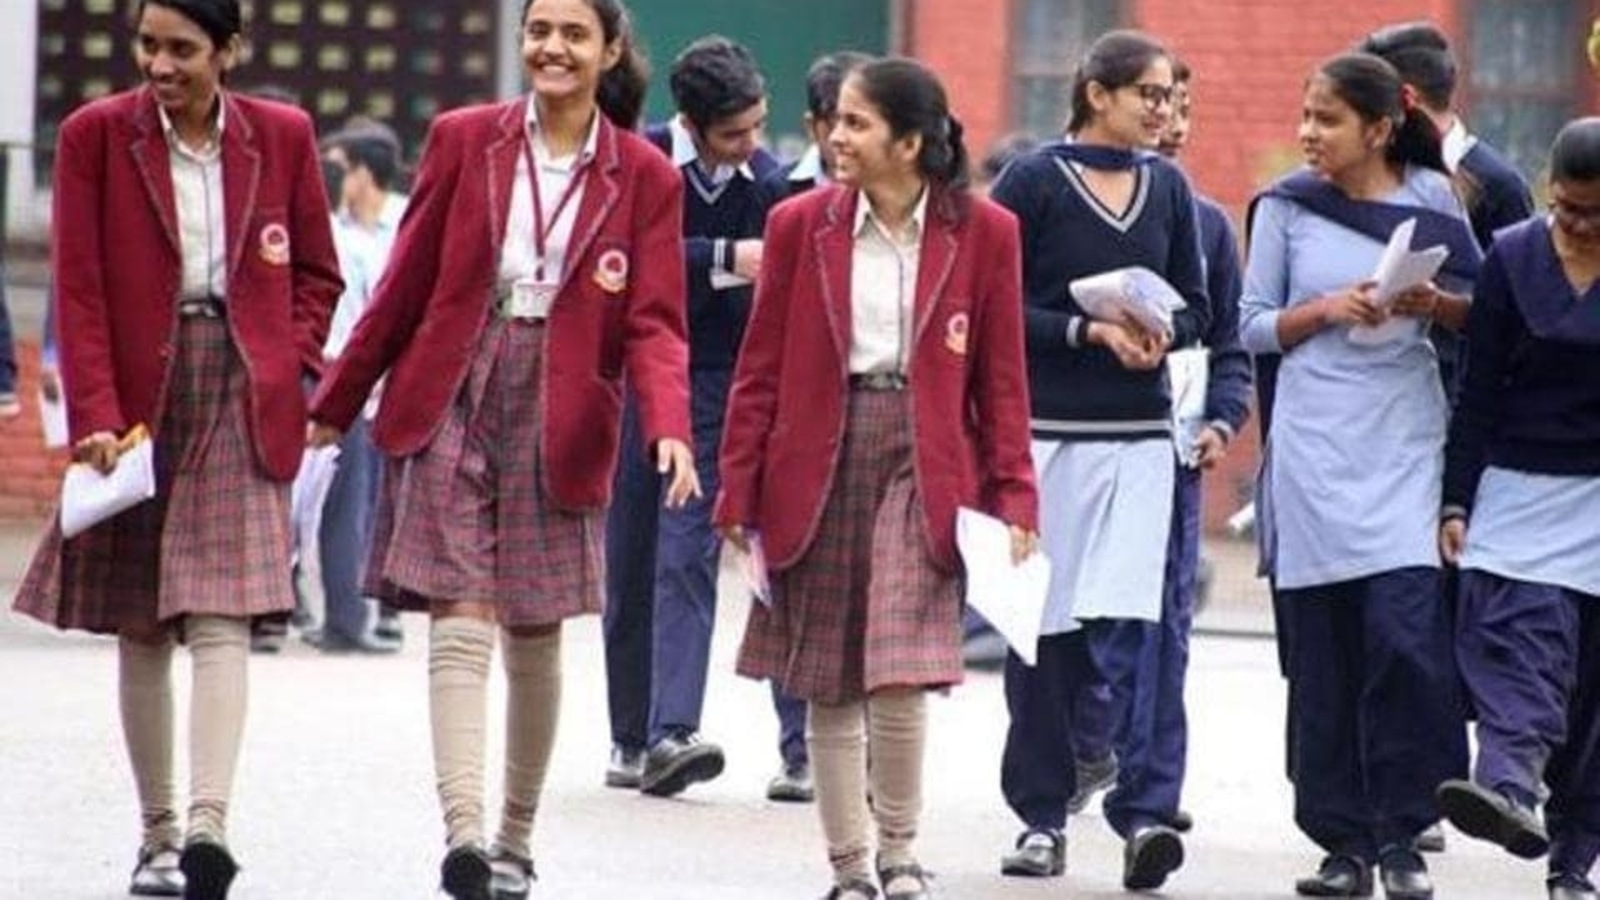 CBSE, CISCE Exams LIVE: CBSE Class 12 Physics paper to begin shortly